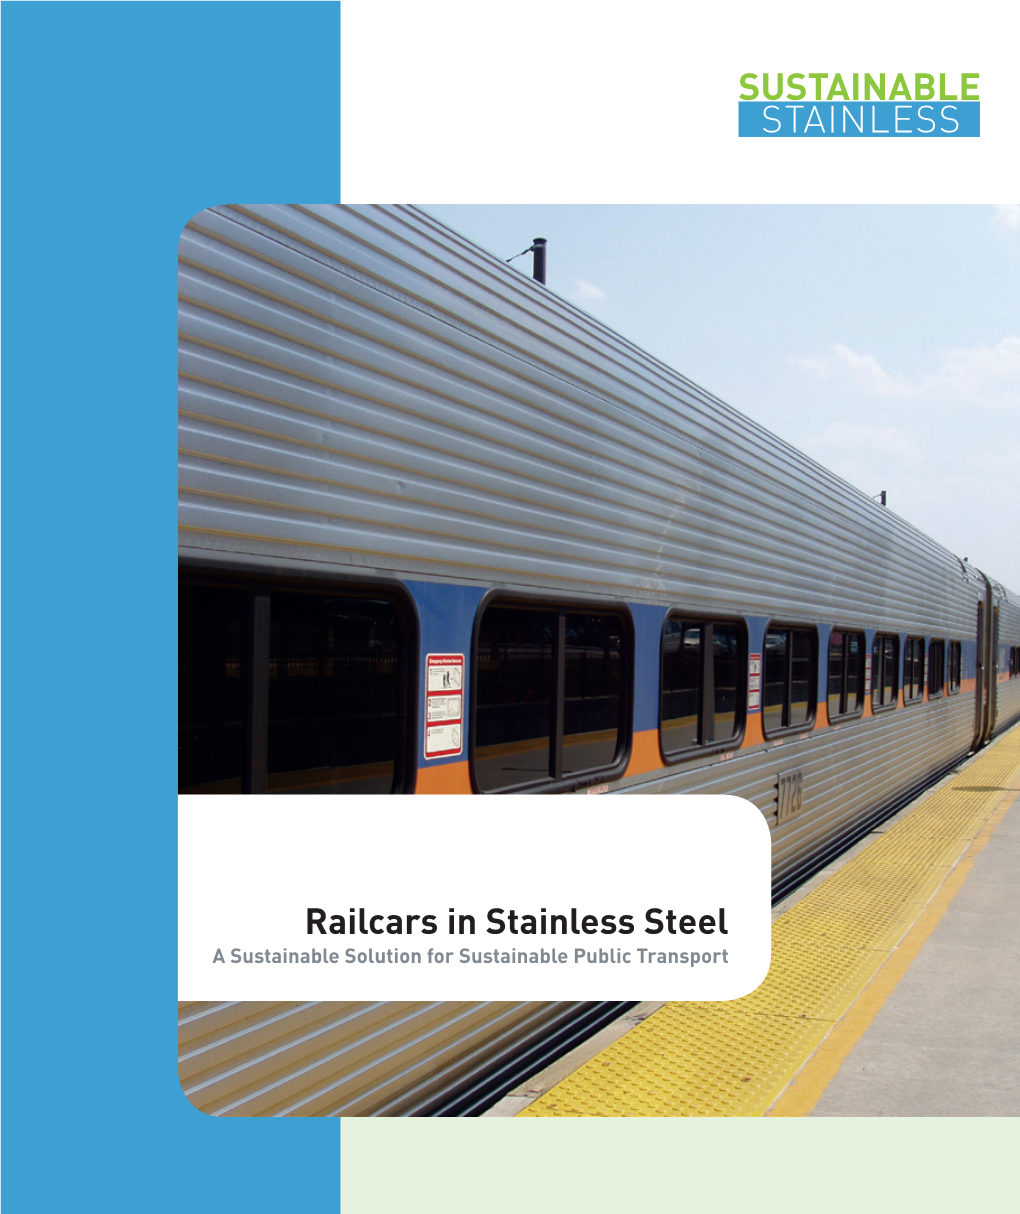 Railcars in Stainless Steel